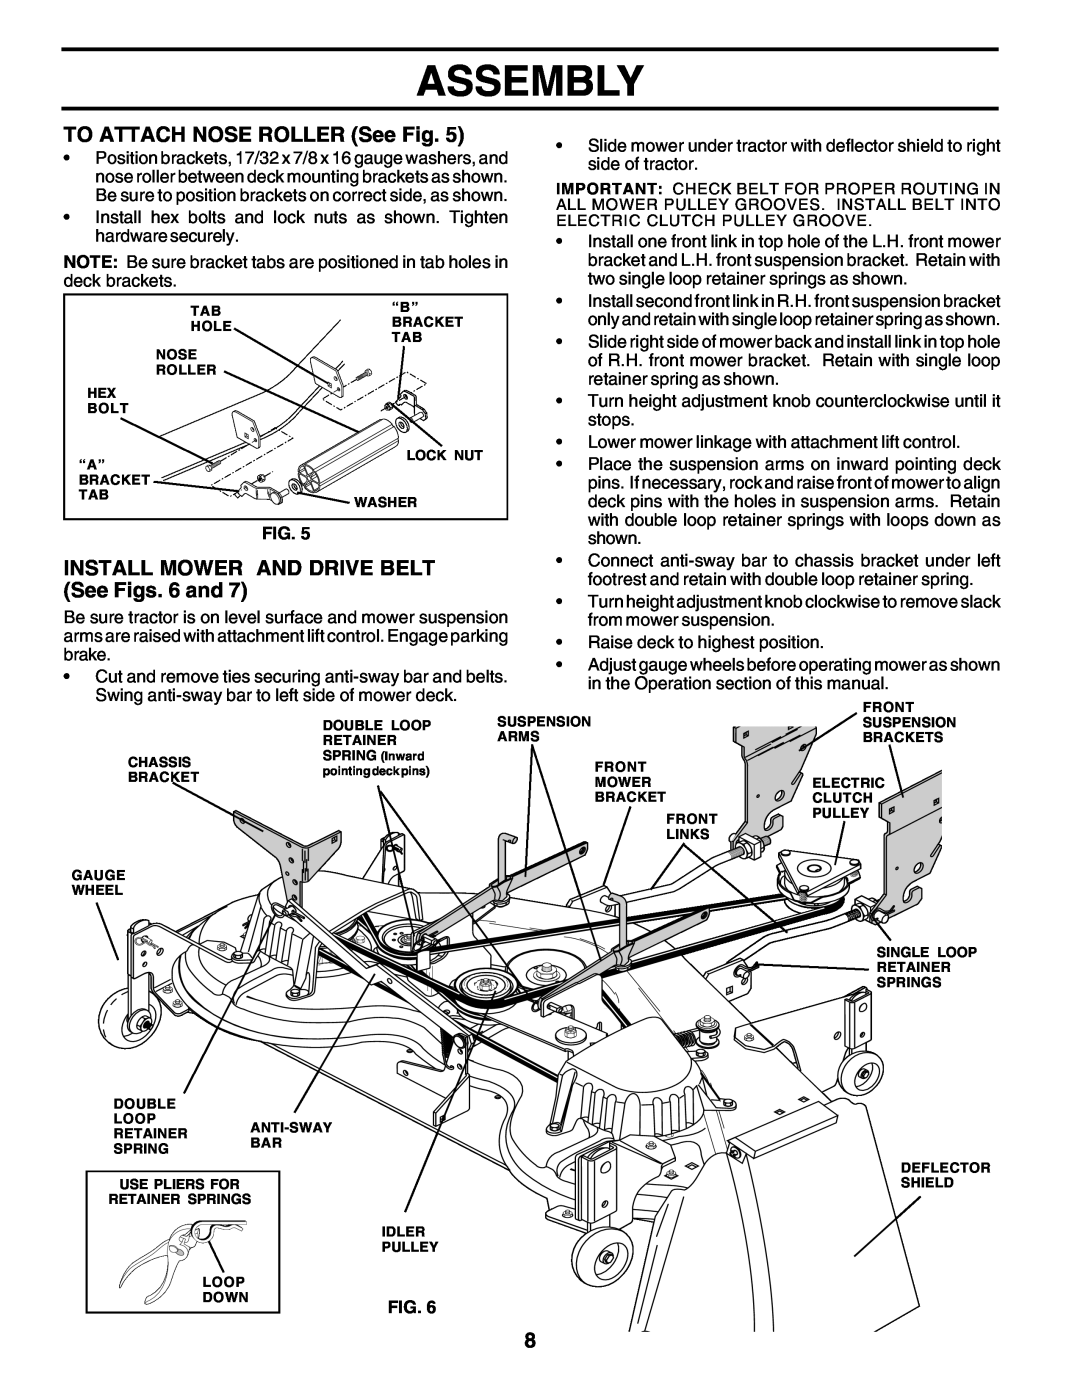 Poulan 177937 owner manual Assembly, TO ATTACH NOSE ROLLER See Fig, Install Mower And Drive Belt, See Figs. 6 and 